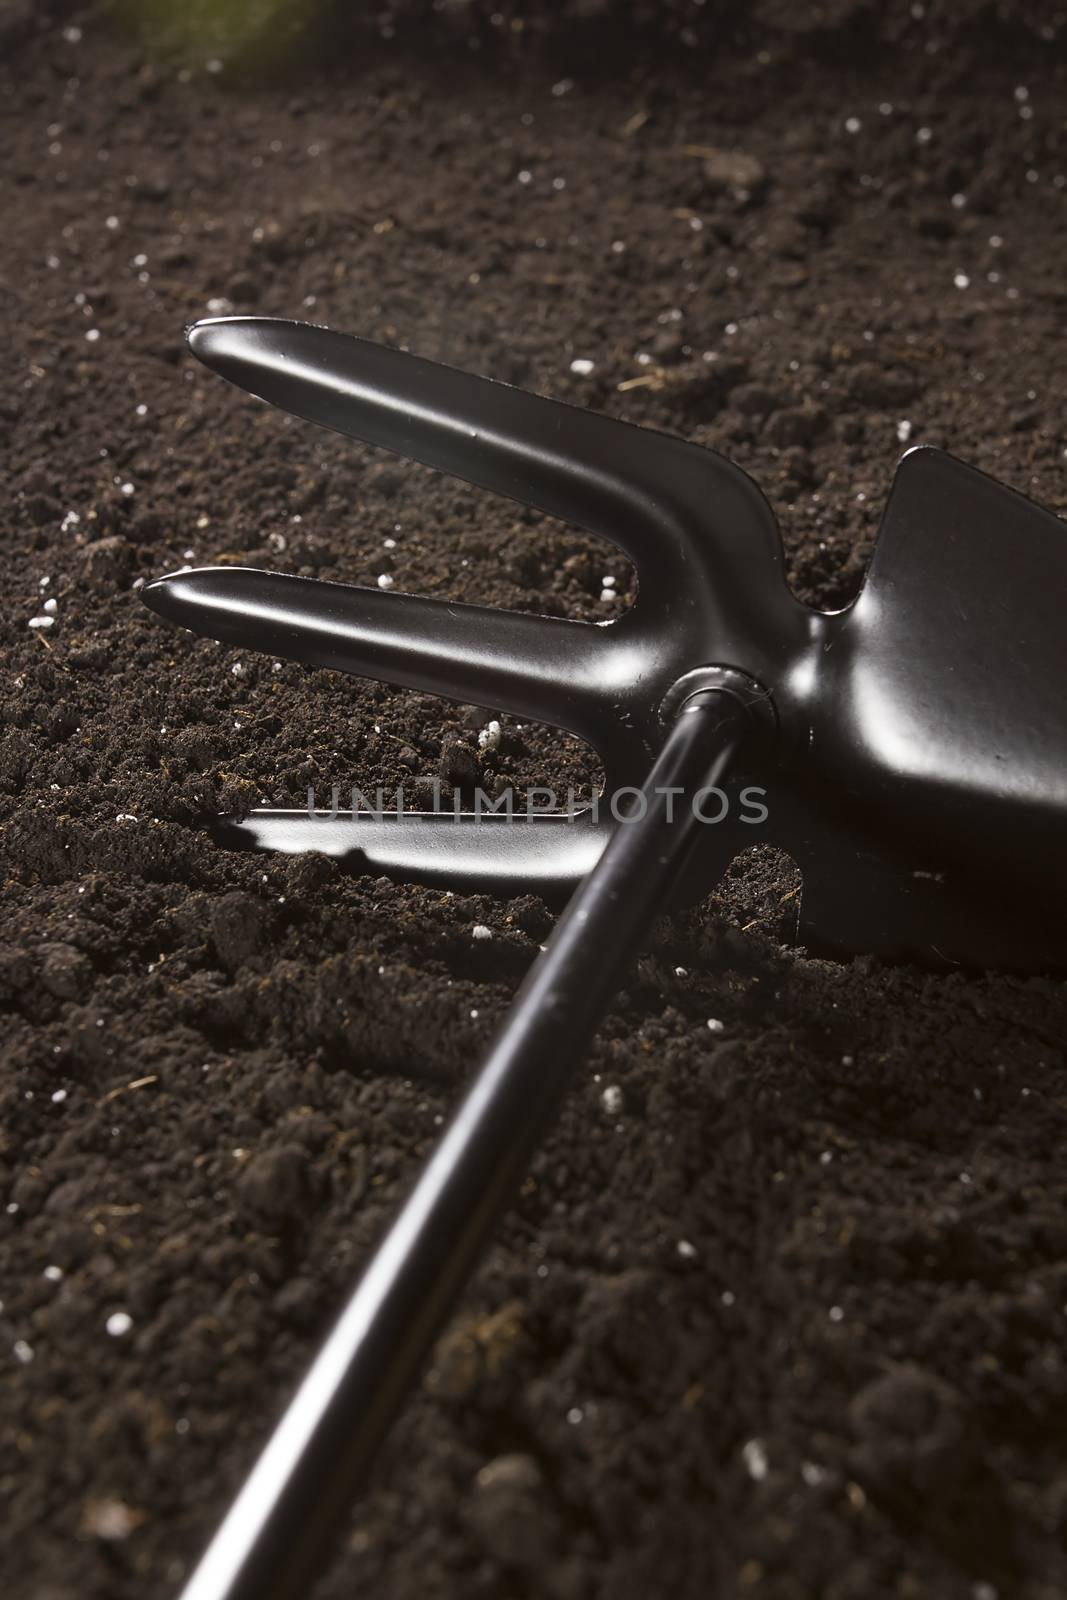 New garden tool in the soil close-up